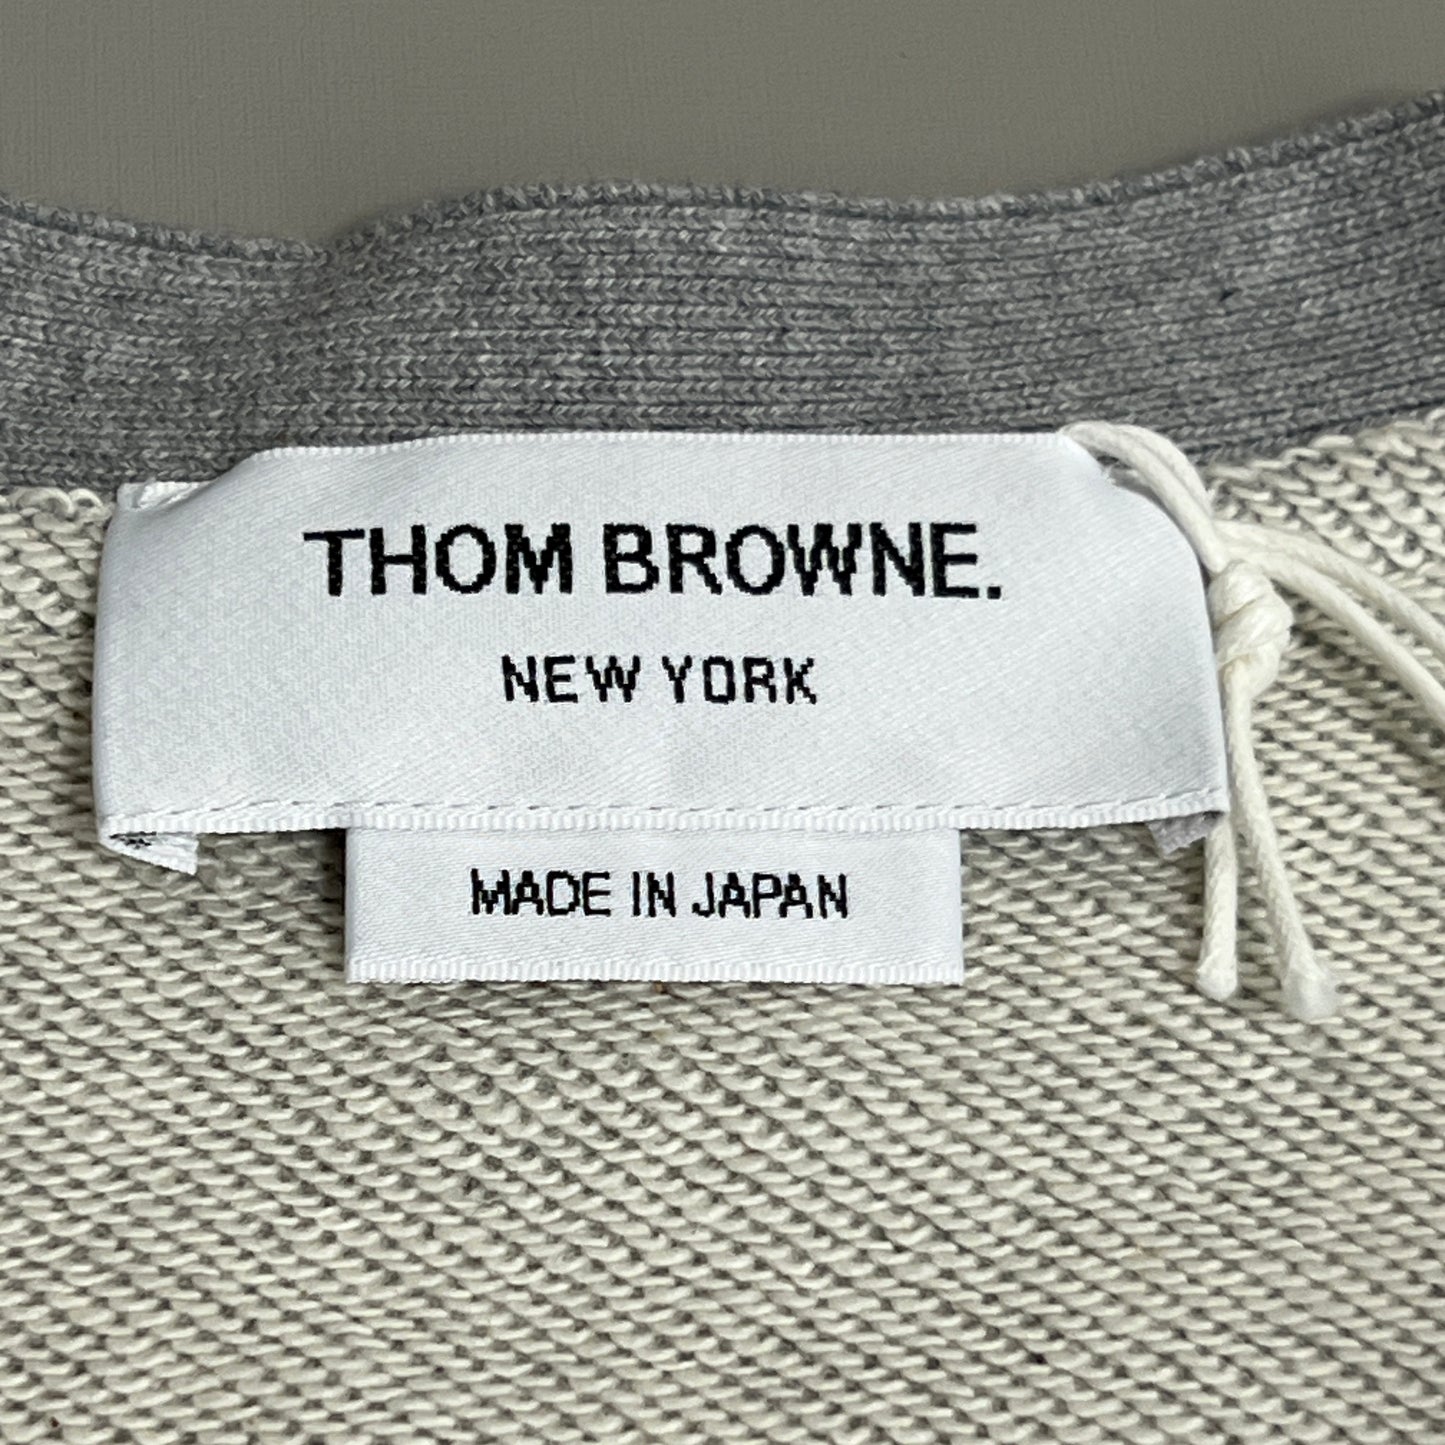 THOM BROWNE V-NECK Cardigan w/ 4Bar in Jersey Loopback Light Grey Size 4 (New)